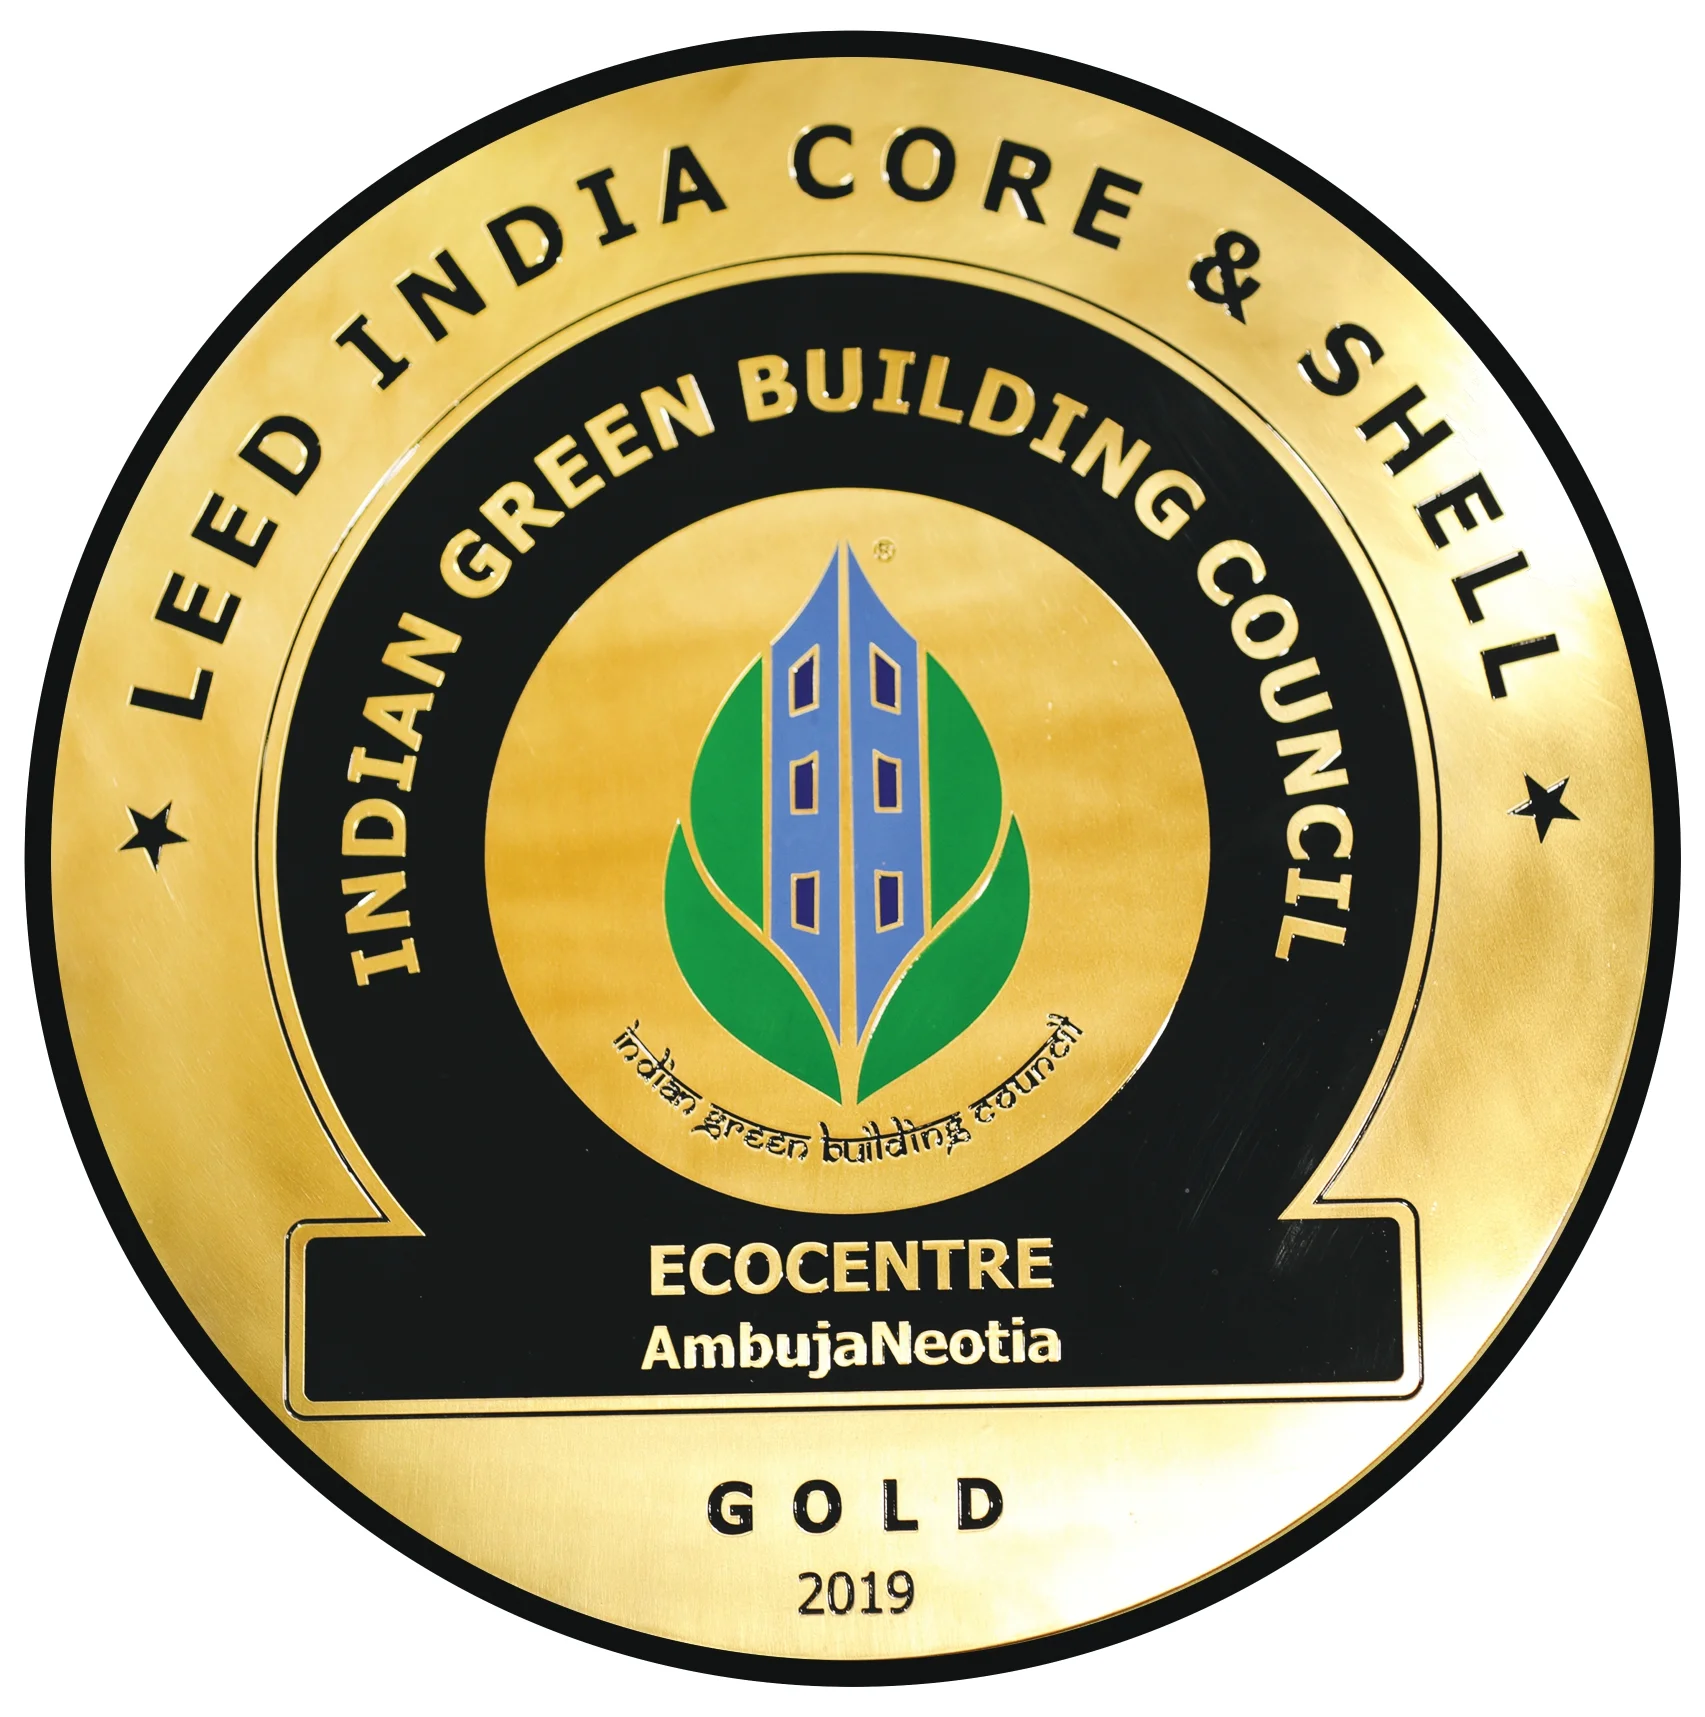 Ecocentre LEED India Core & Shell Certification